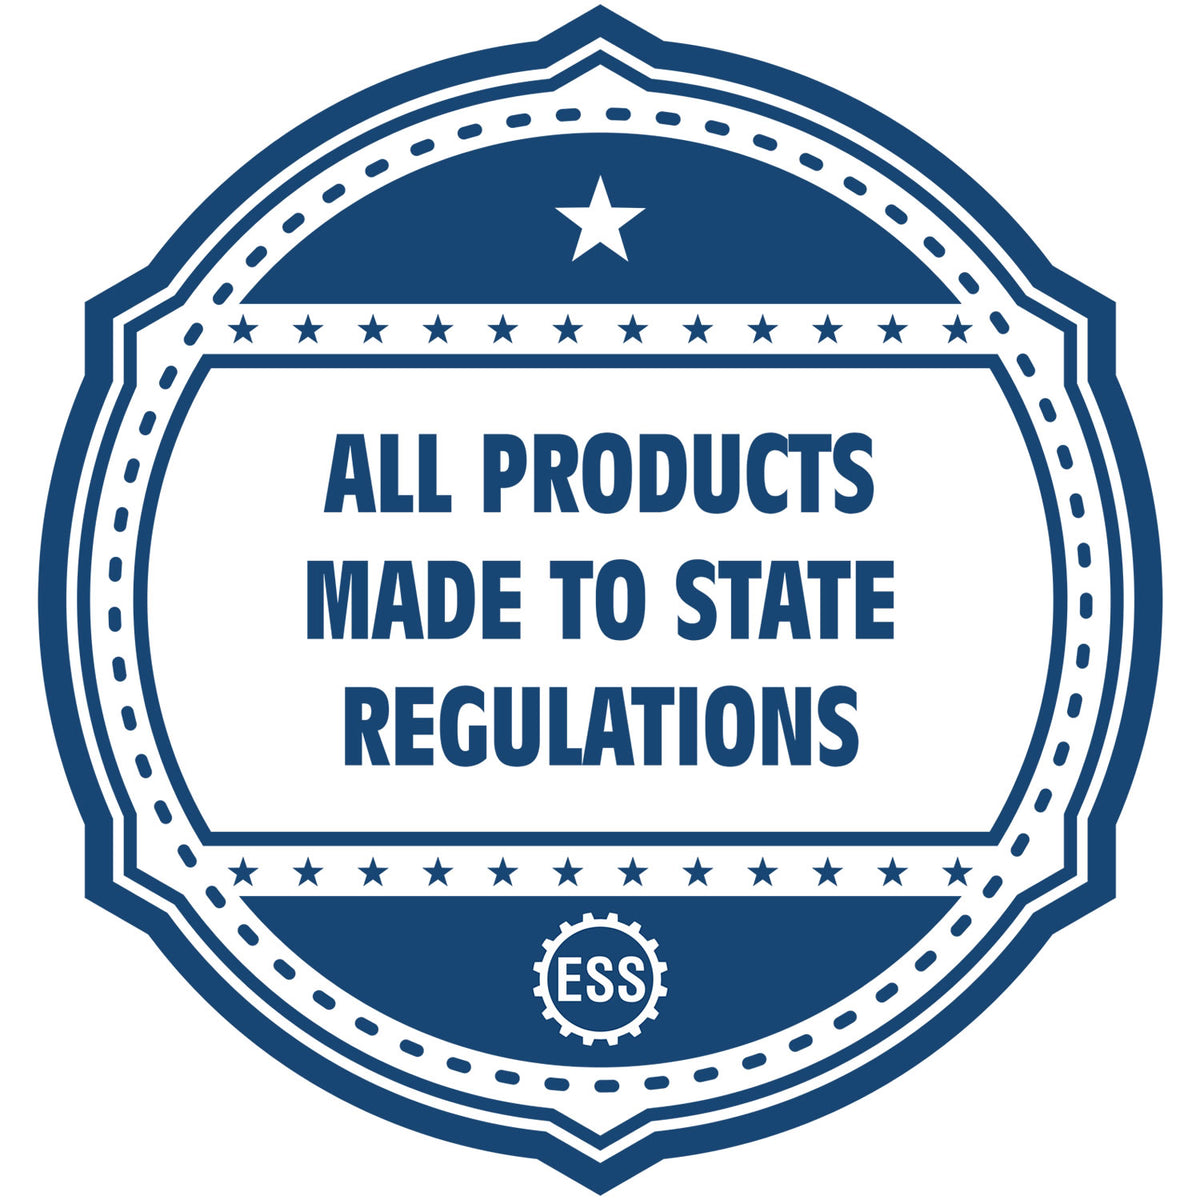 An icon or badge element for the MaxLight Premium Pre-Inked Ohio State Seal Notarial Stamp showing that this product is made in compliance with state regulations.